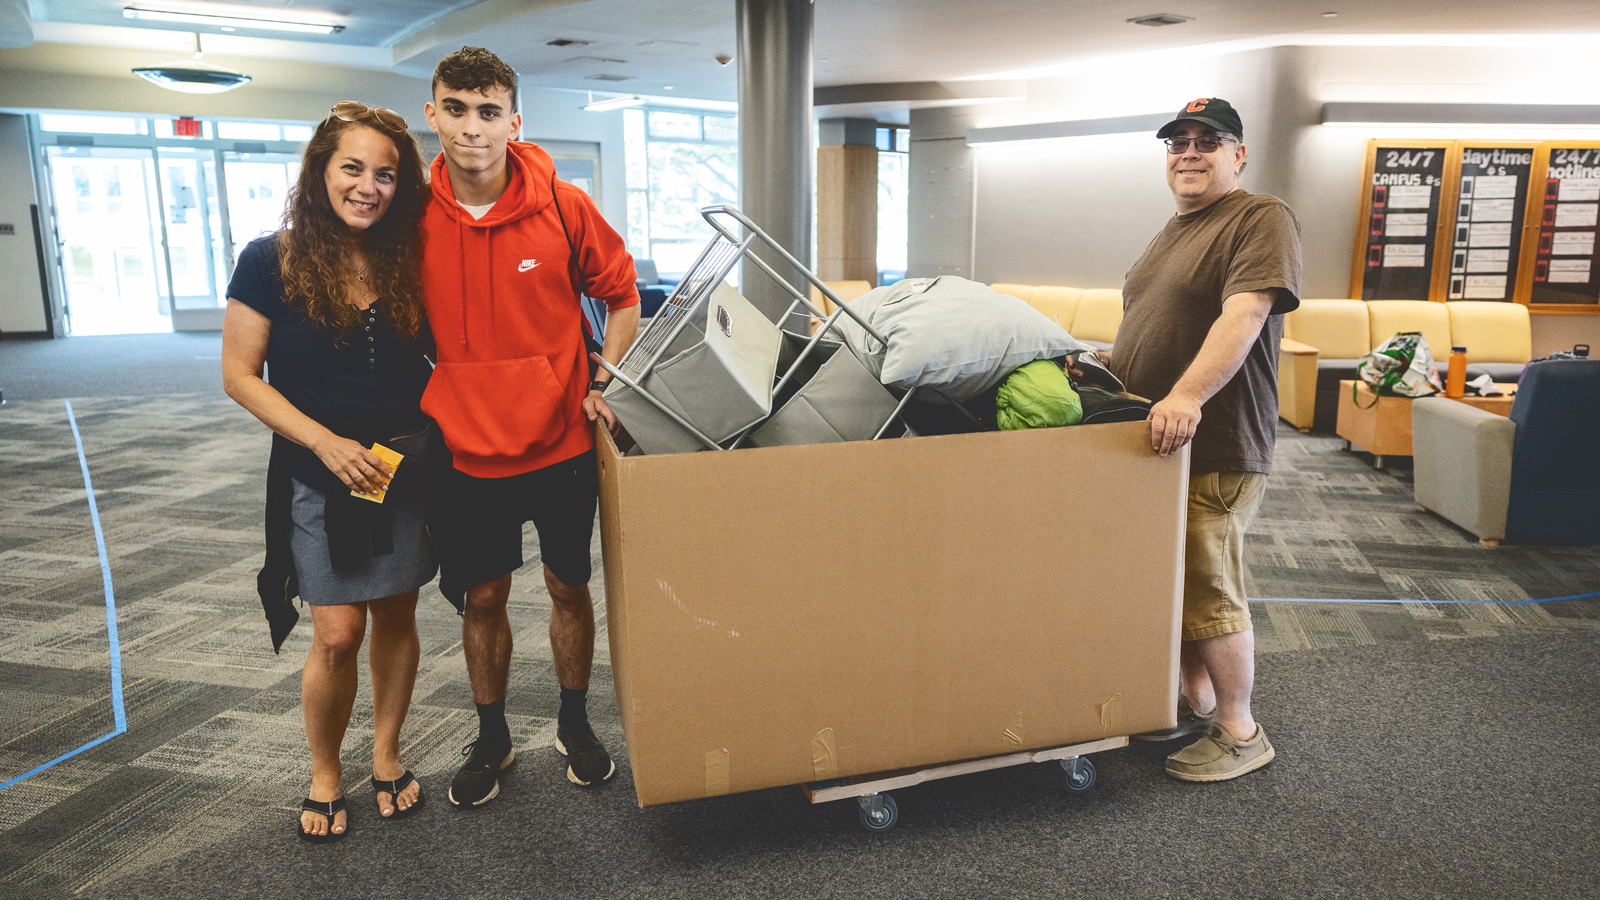 A college student and his parents push a large box filed with furniture and pillows in a Cornell University dormitory.